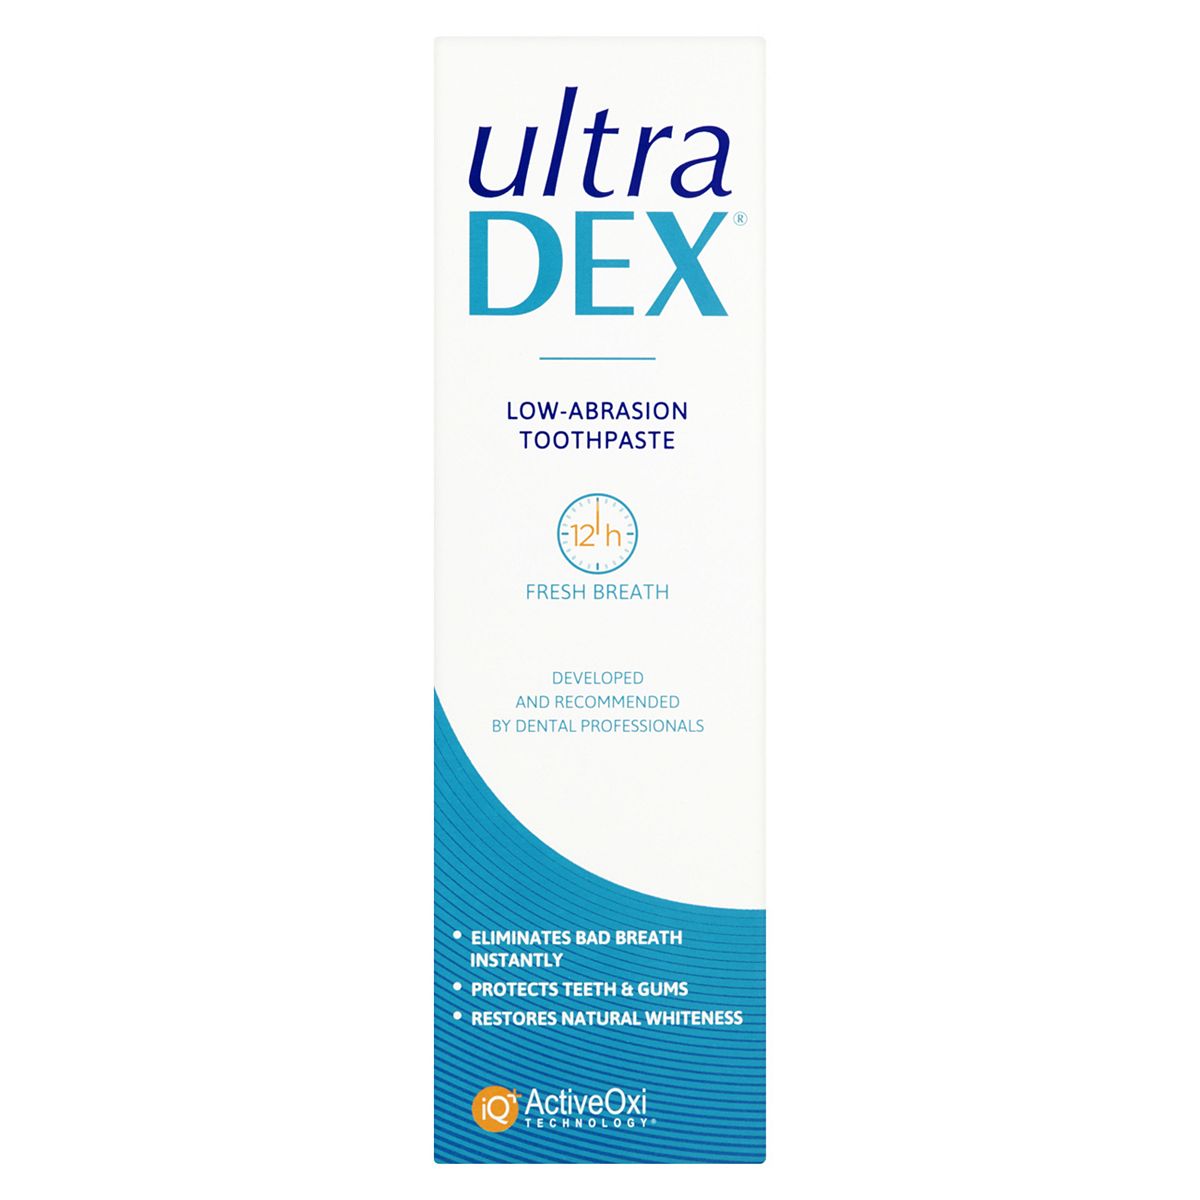 UltraDEX Low-Abrasion Toothpaste 75ml toothpaste Boots   